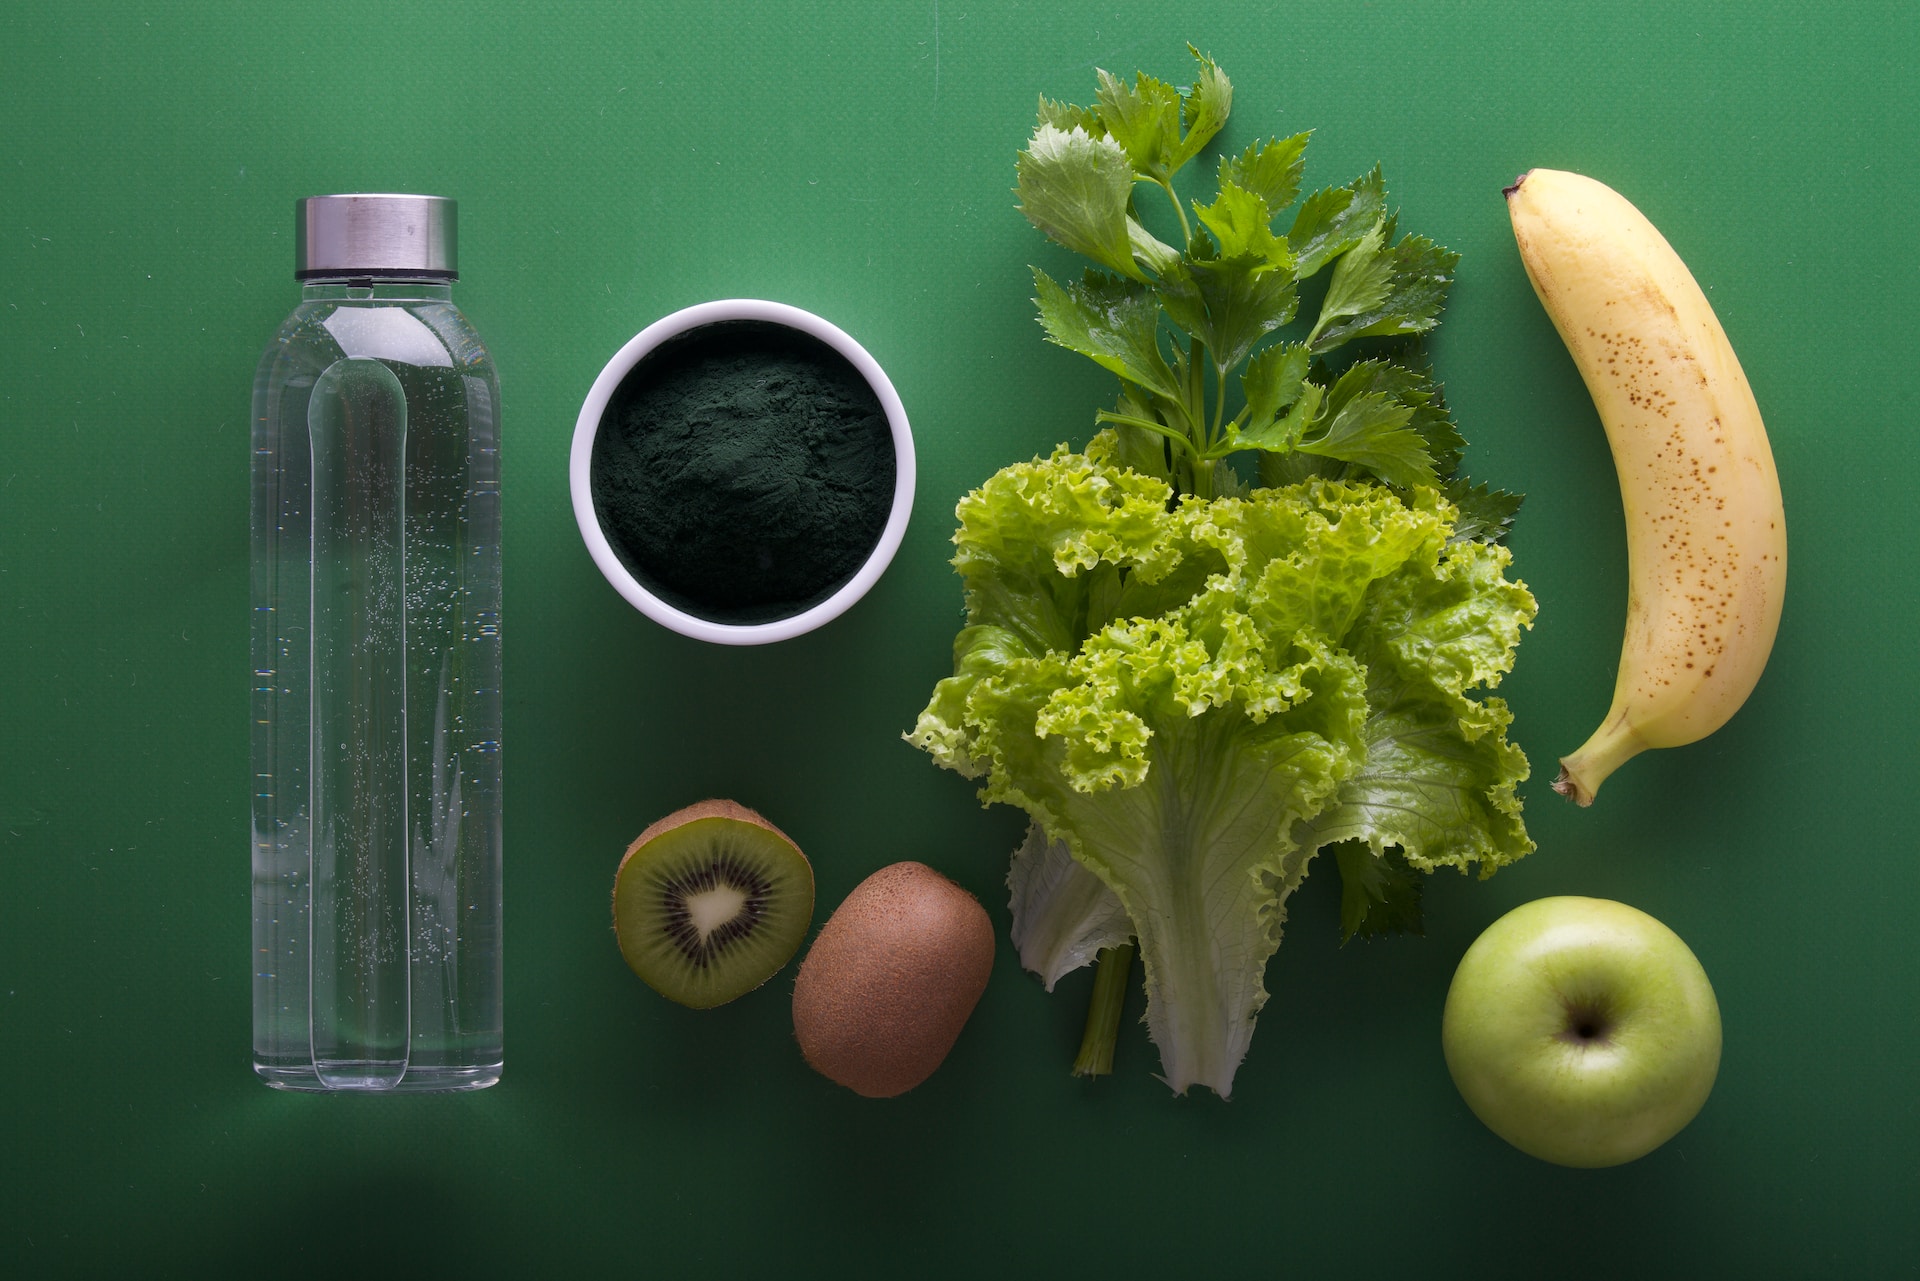 the image shows fruits, greens and a bottle of water